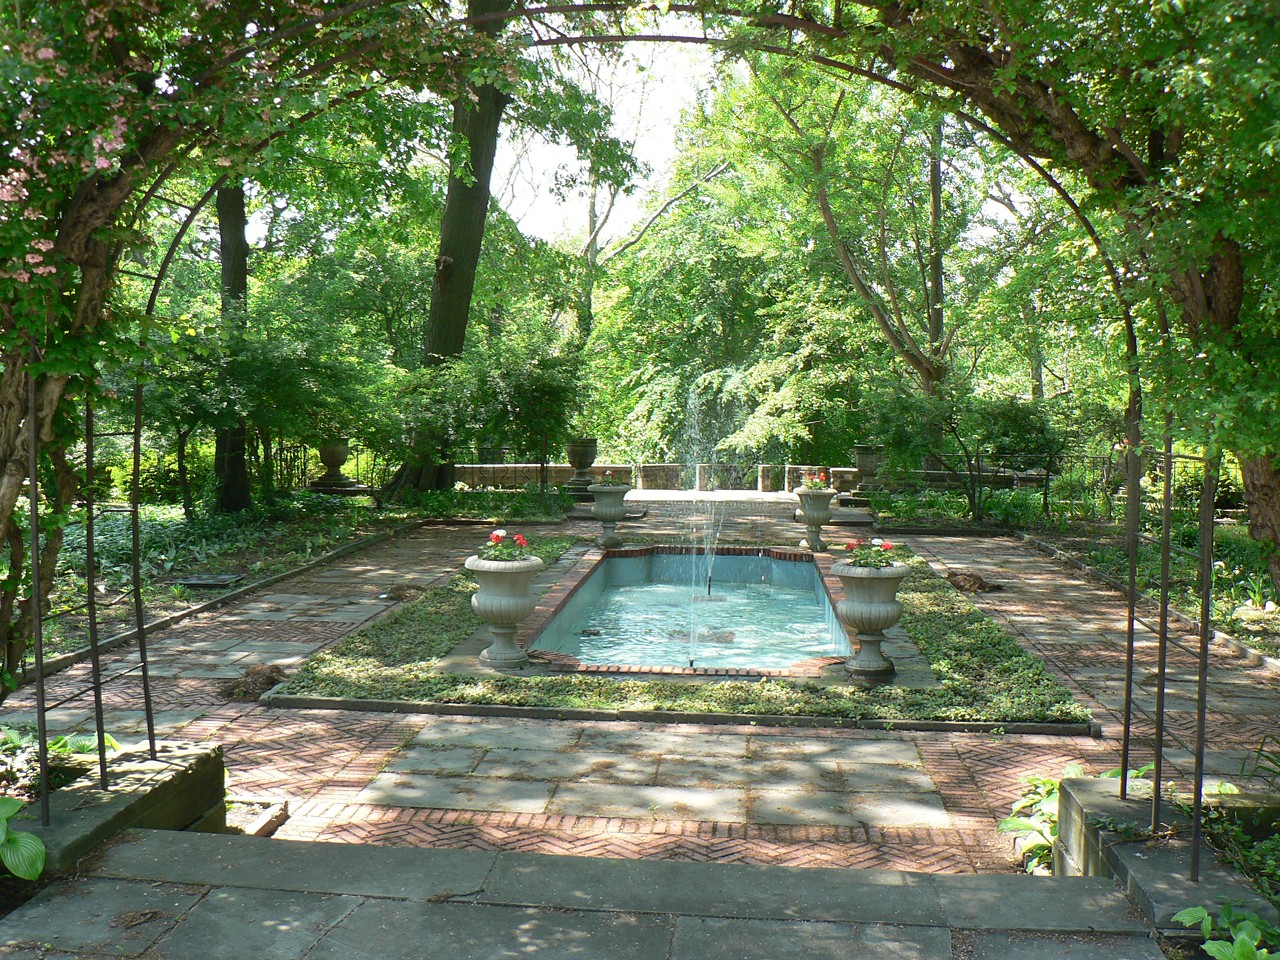 Visit Cleveland's Heritage Gardens - Our city is full of culture and heritage, and you can see a glimpse of that all in one spot at each of the 27 gardens. Each garden in located in Rockefeller Park along East Boulevard and Martin Luther King Drive.